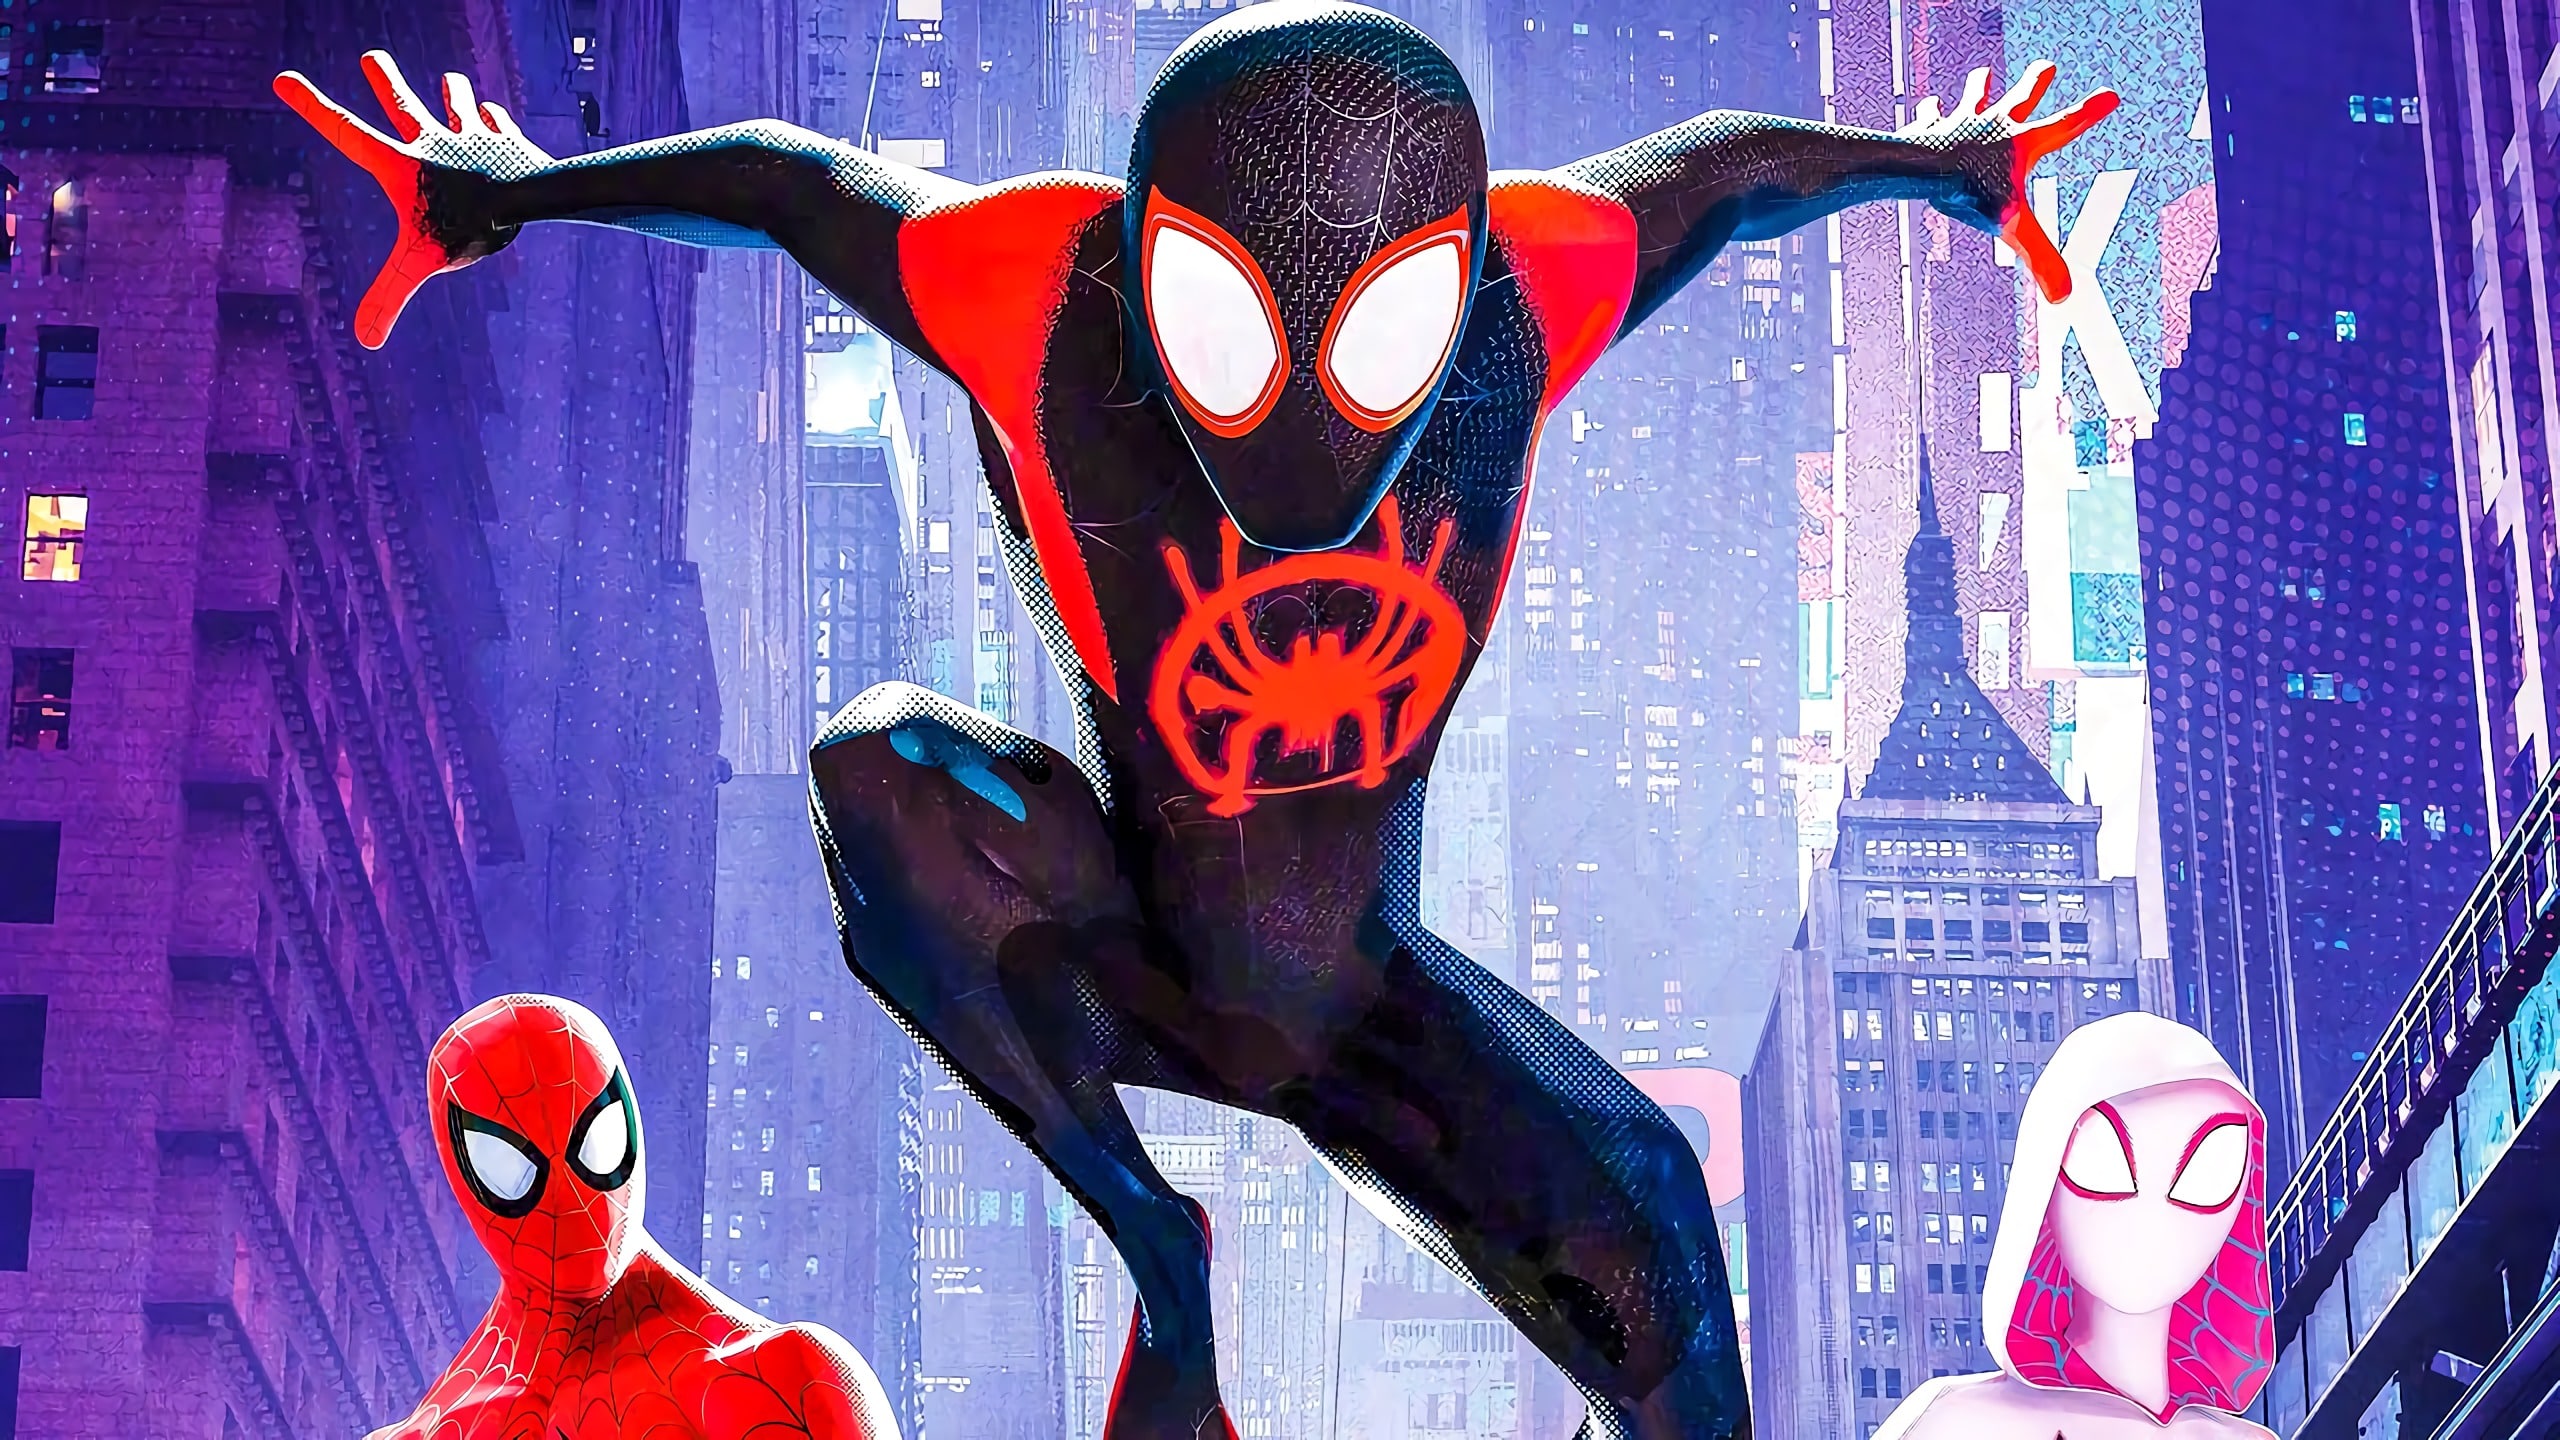 Spider-Man: Into the Spider-Verse now available for streaming on Netflix